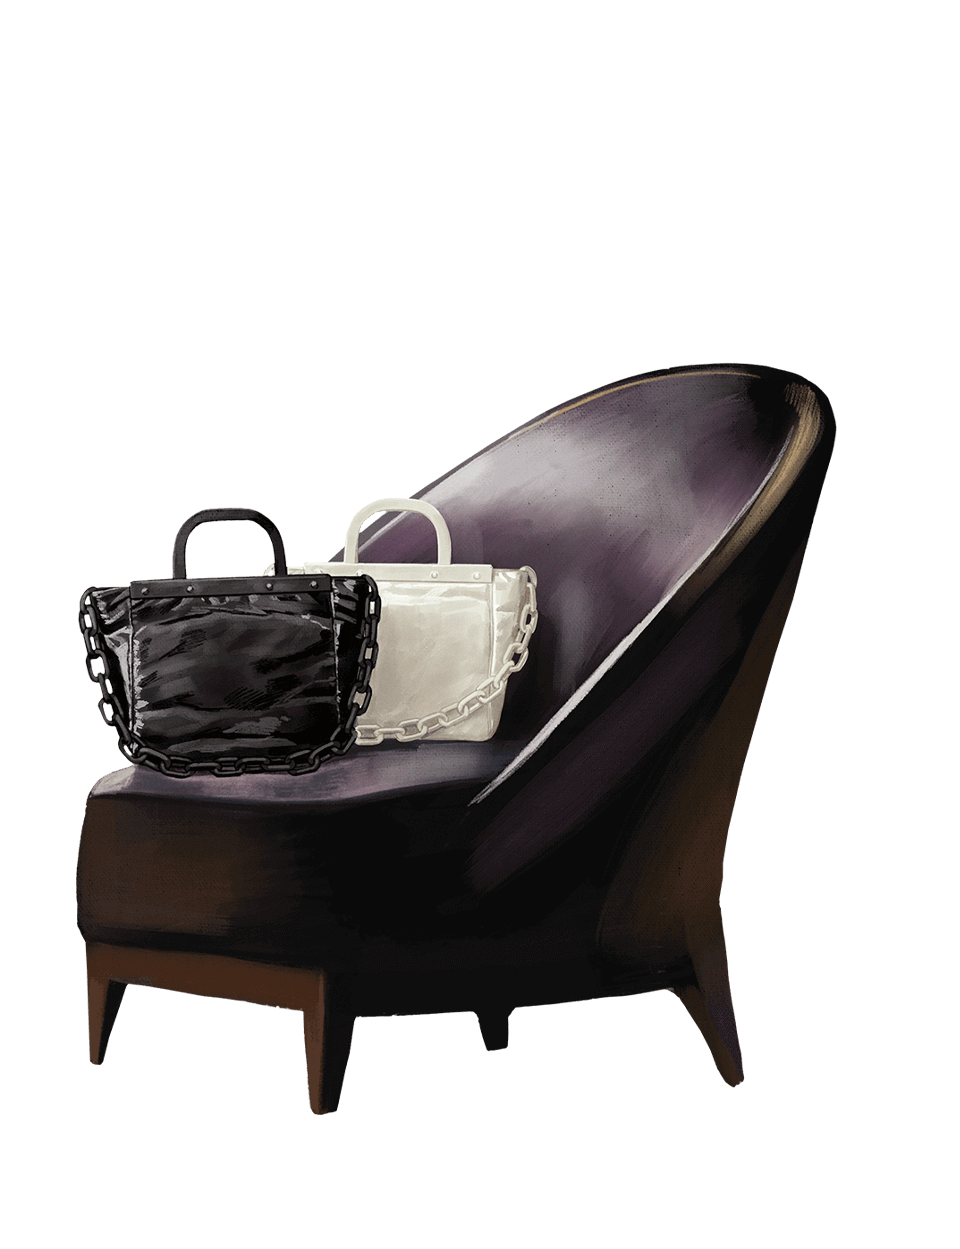 Women’s large patent tote bag in black and white – CHARLES & KEITH - Web - Chair